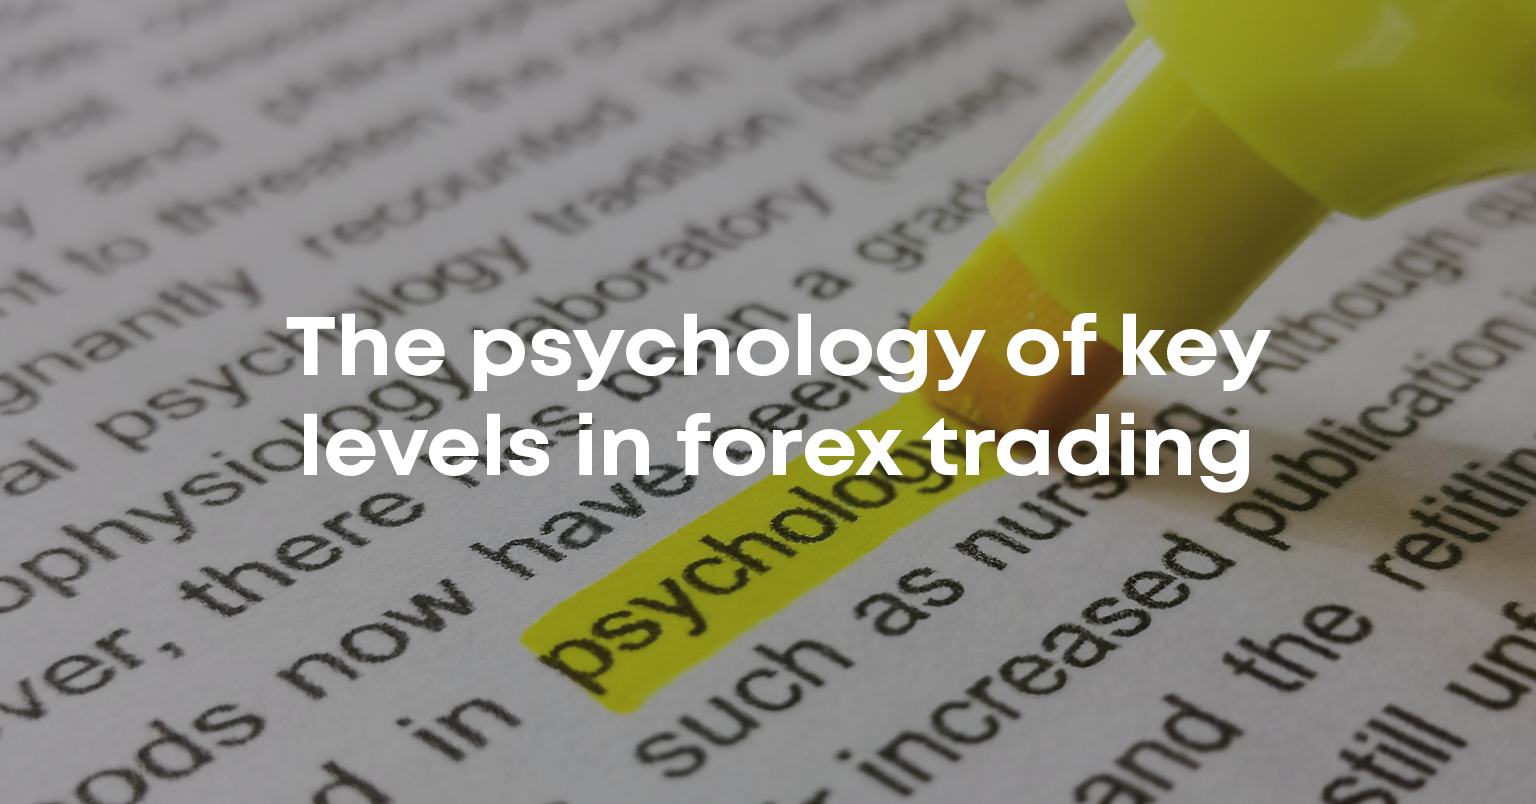  The psychology of key levels in forex trading